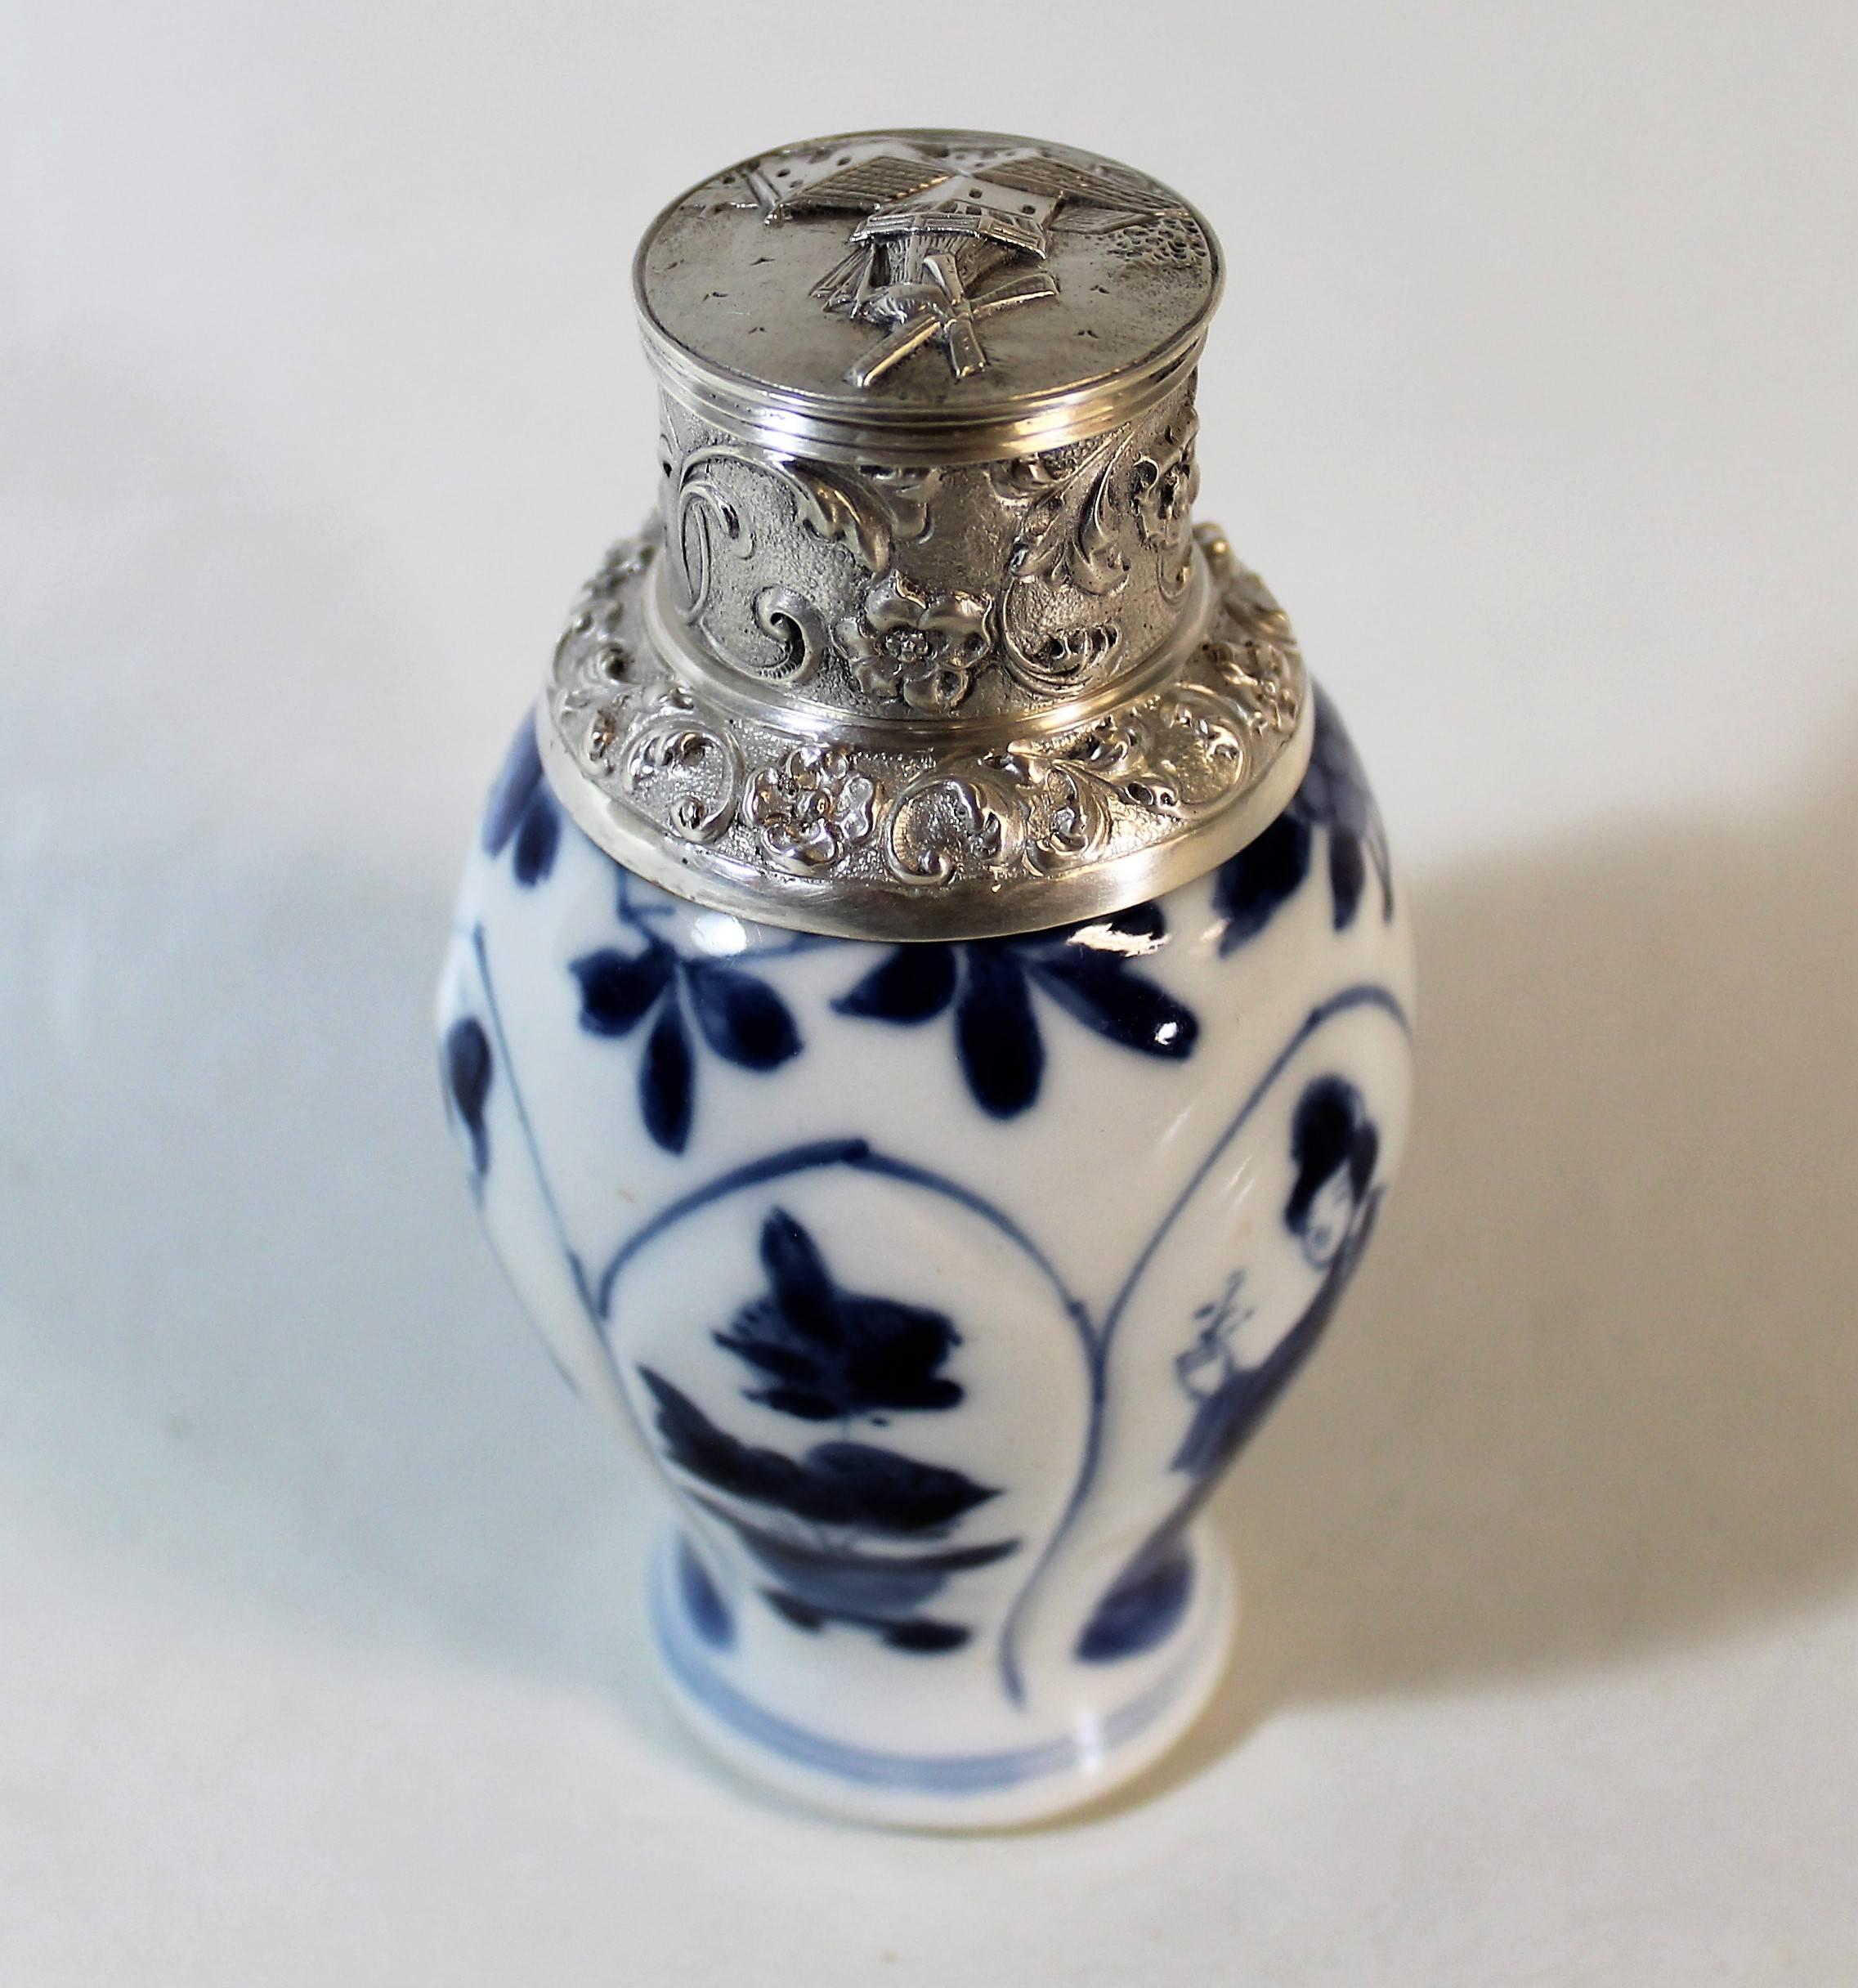 19th Century Chinese Porcelain Tea Caddy with Dutch Sterling Silver Lid In Excellent Condition For Sale In Hamilton, Ontario